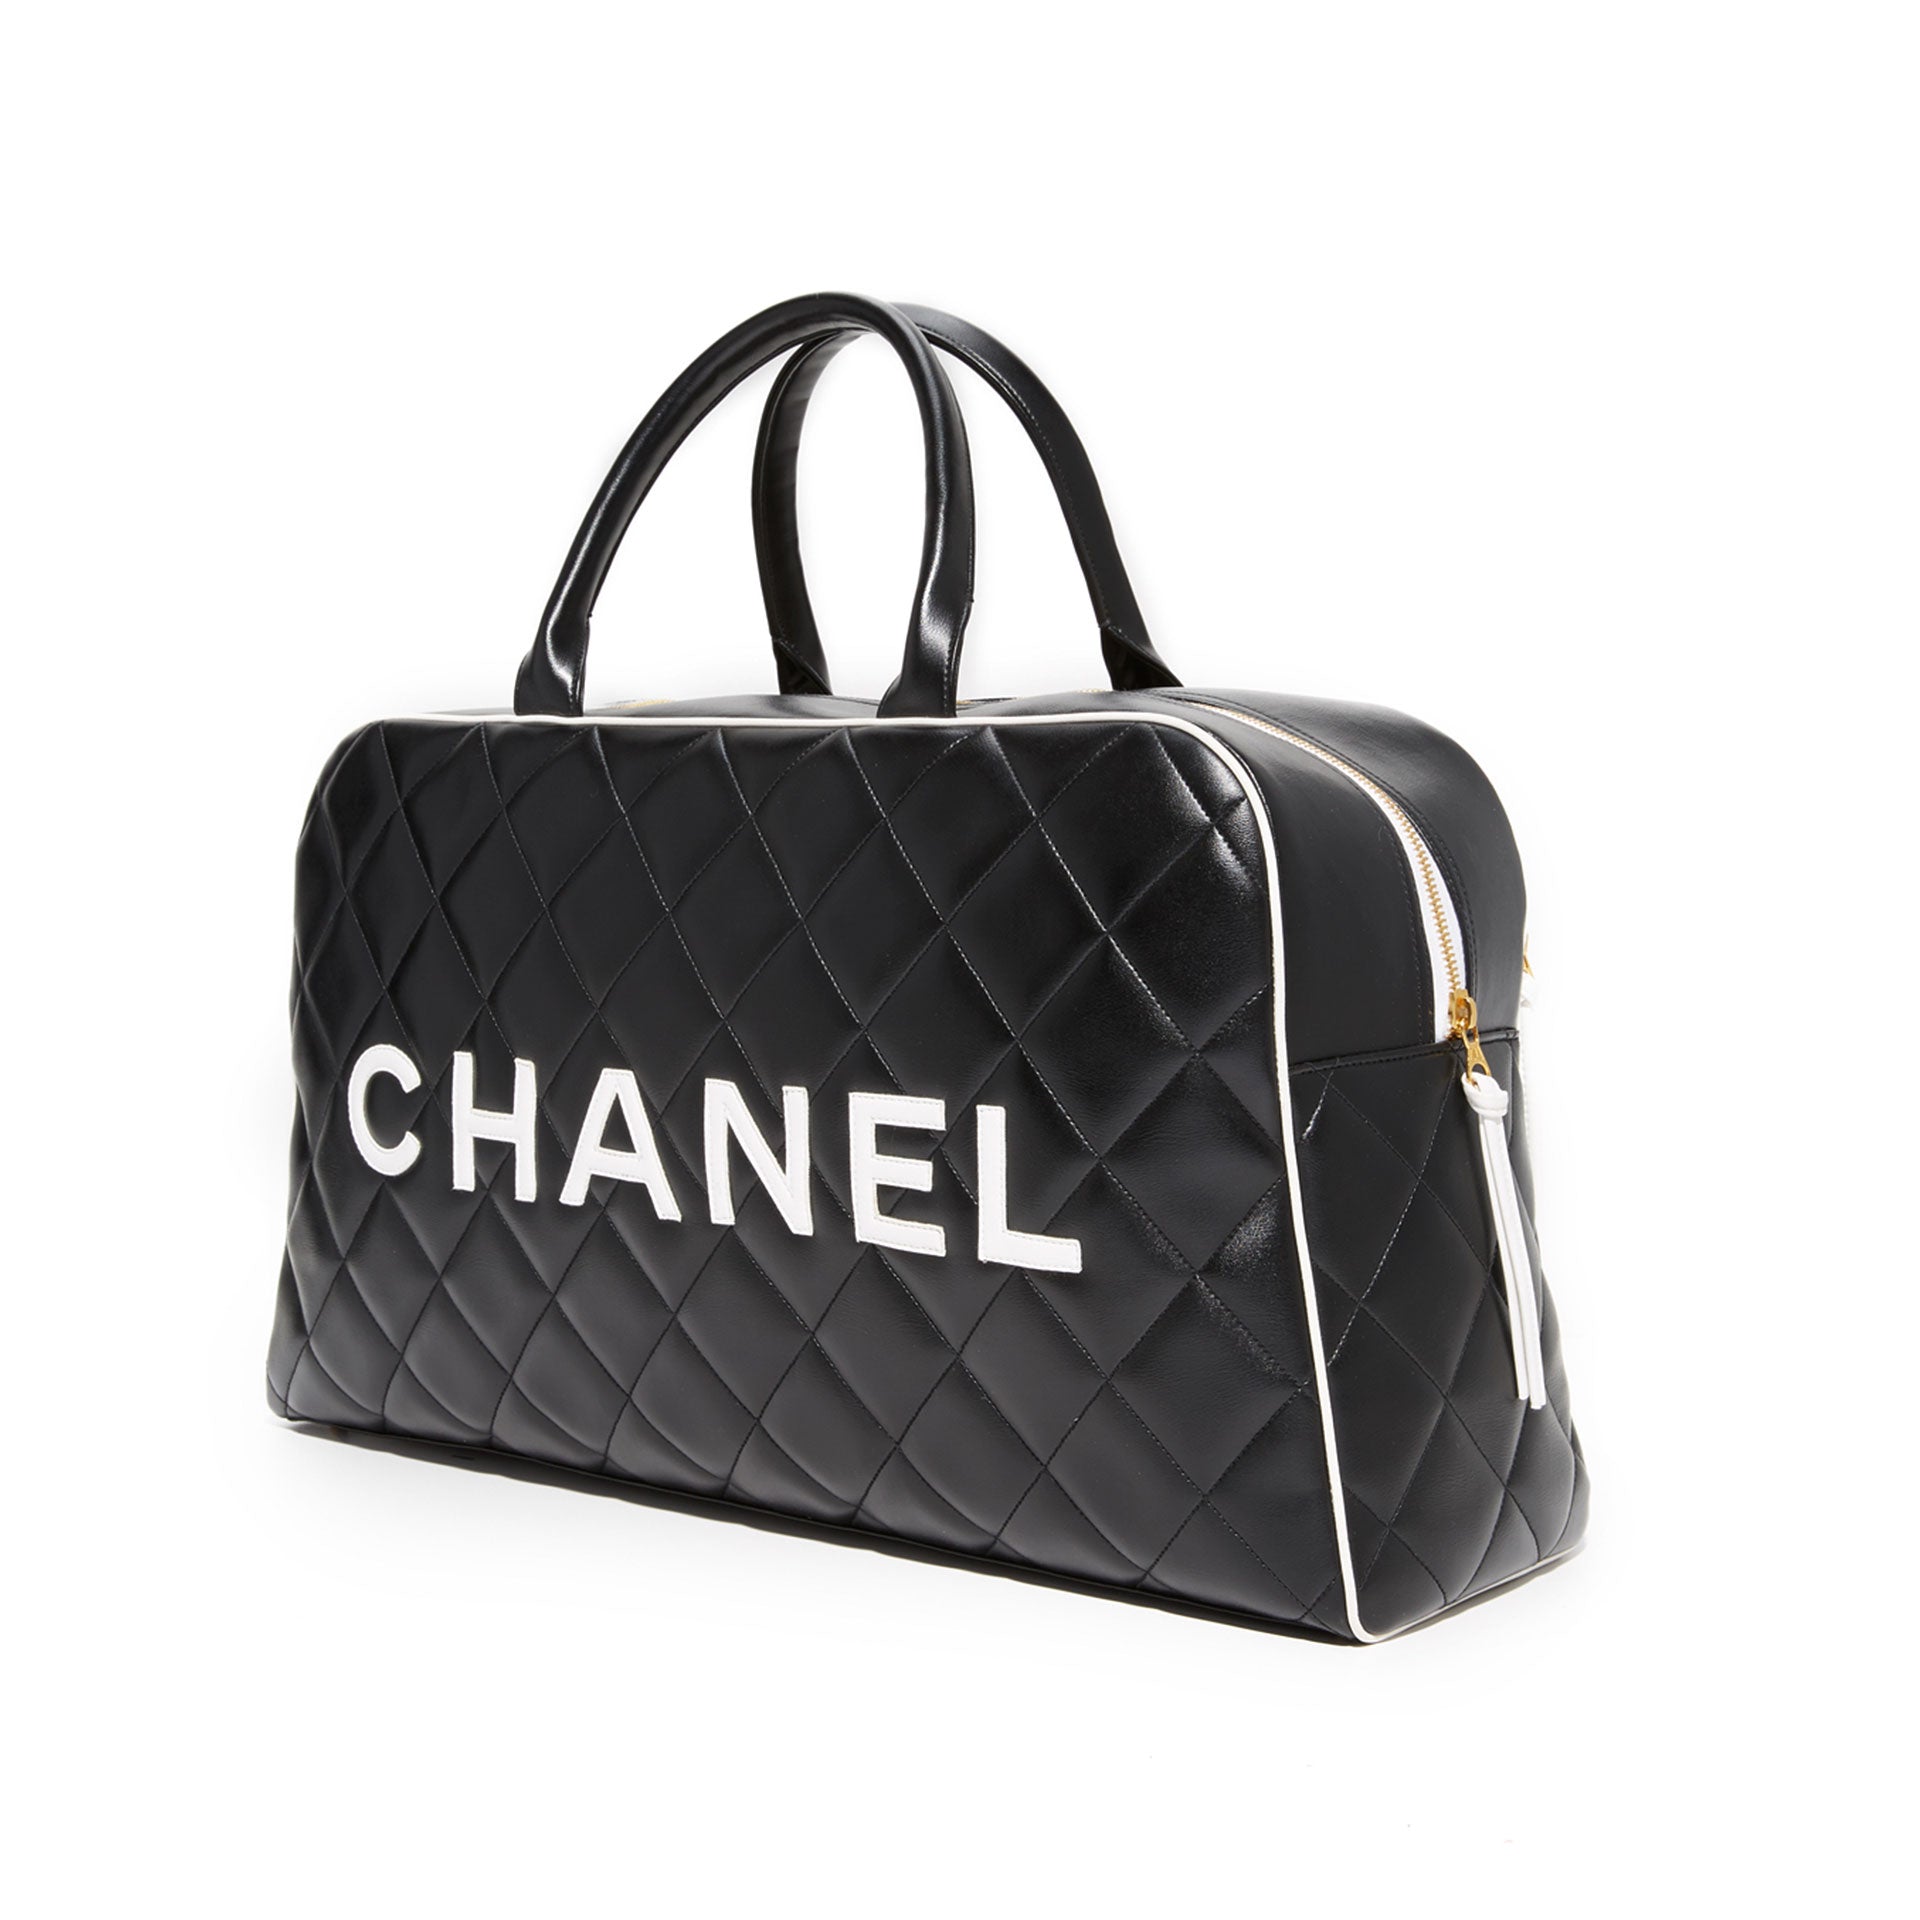 Chanel Logo Letters Vintage Quilted Duffel Bag Travel Tote